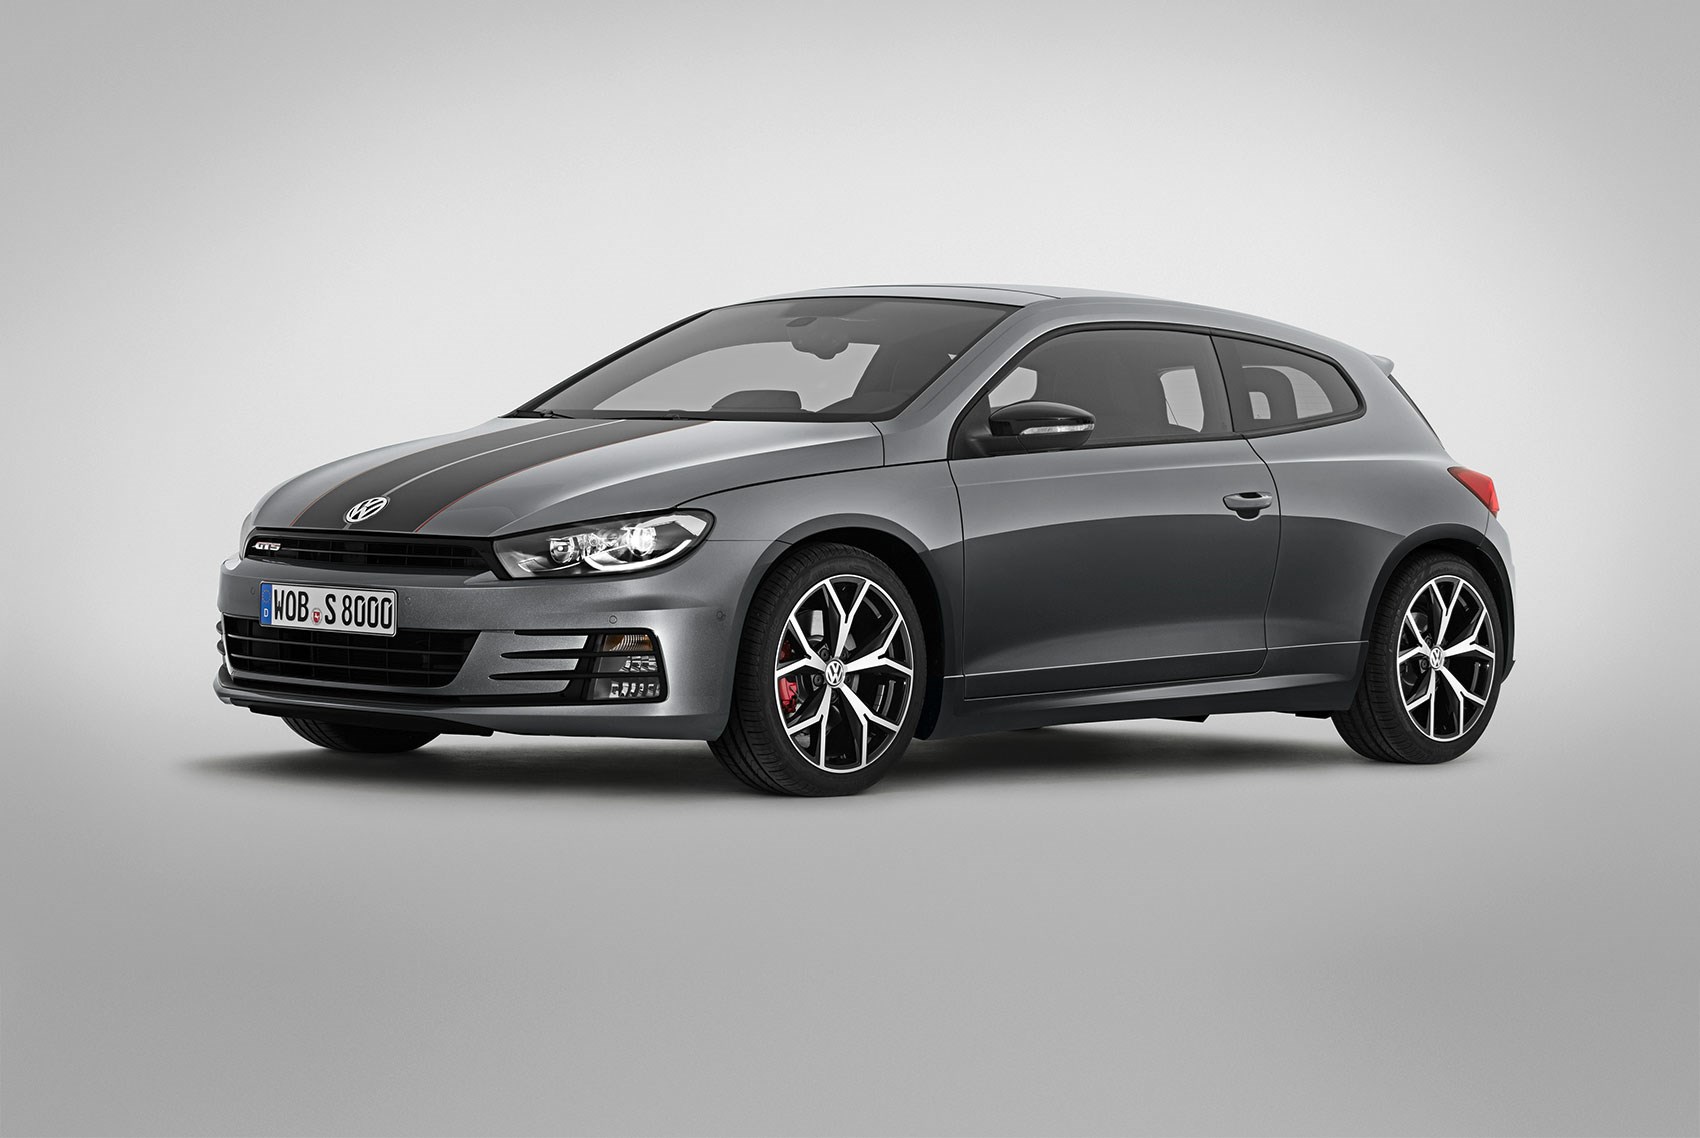 Shanghai special – new VW Scirocco GTS to debut in China